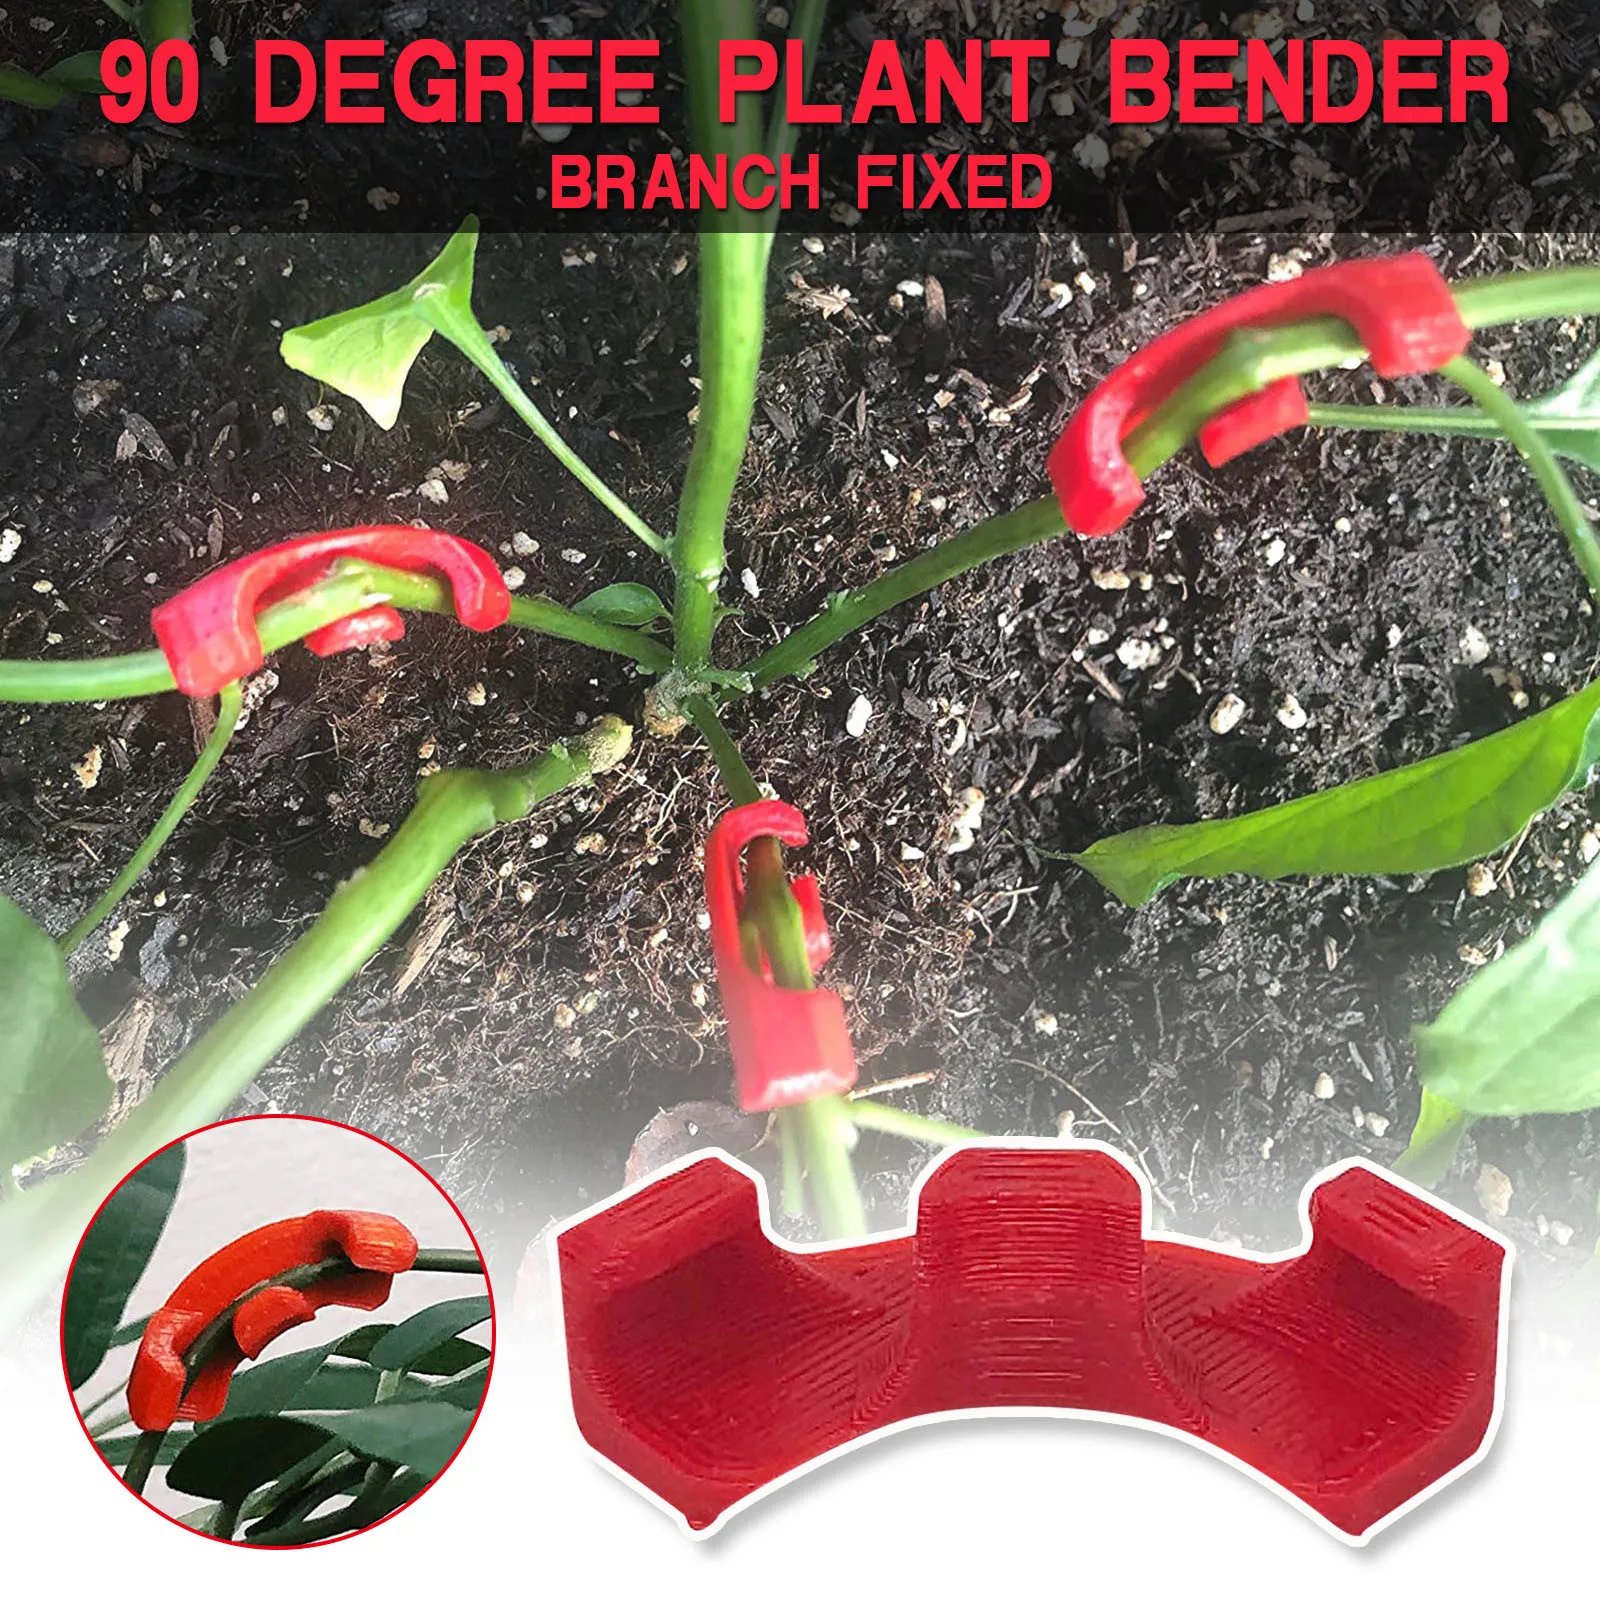 Plant Bending Tool，Control Plant Growth Through Plant Bending clamp，Plant Training for Low Stress Training WANLING 100 Pcs Plant Bender 